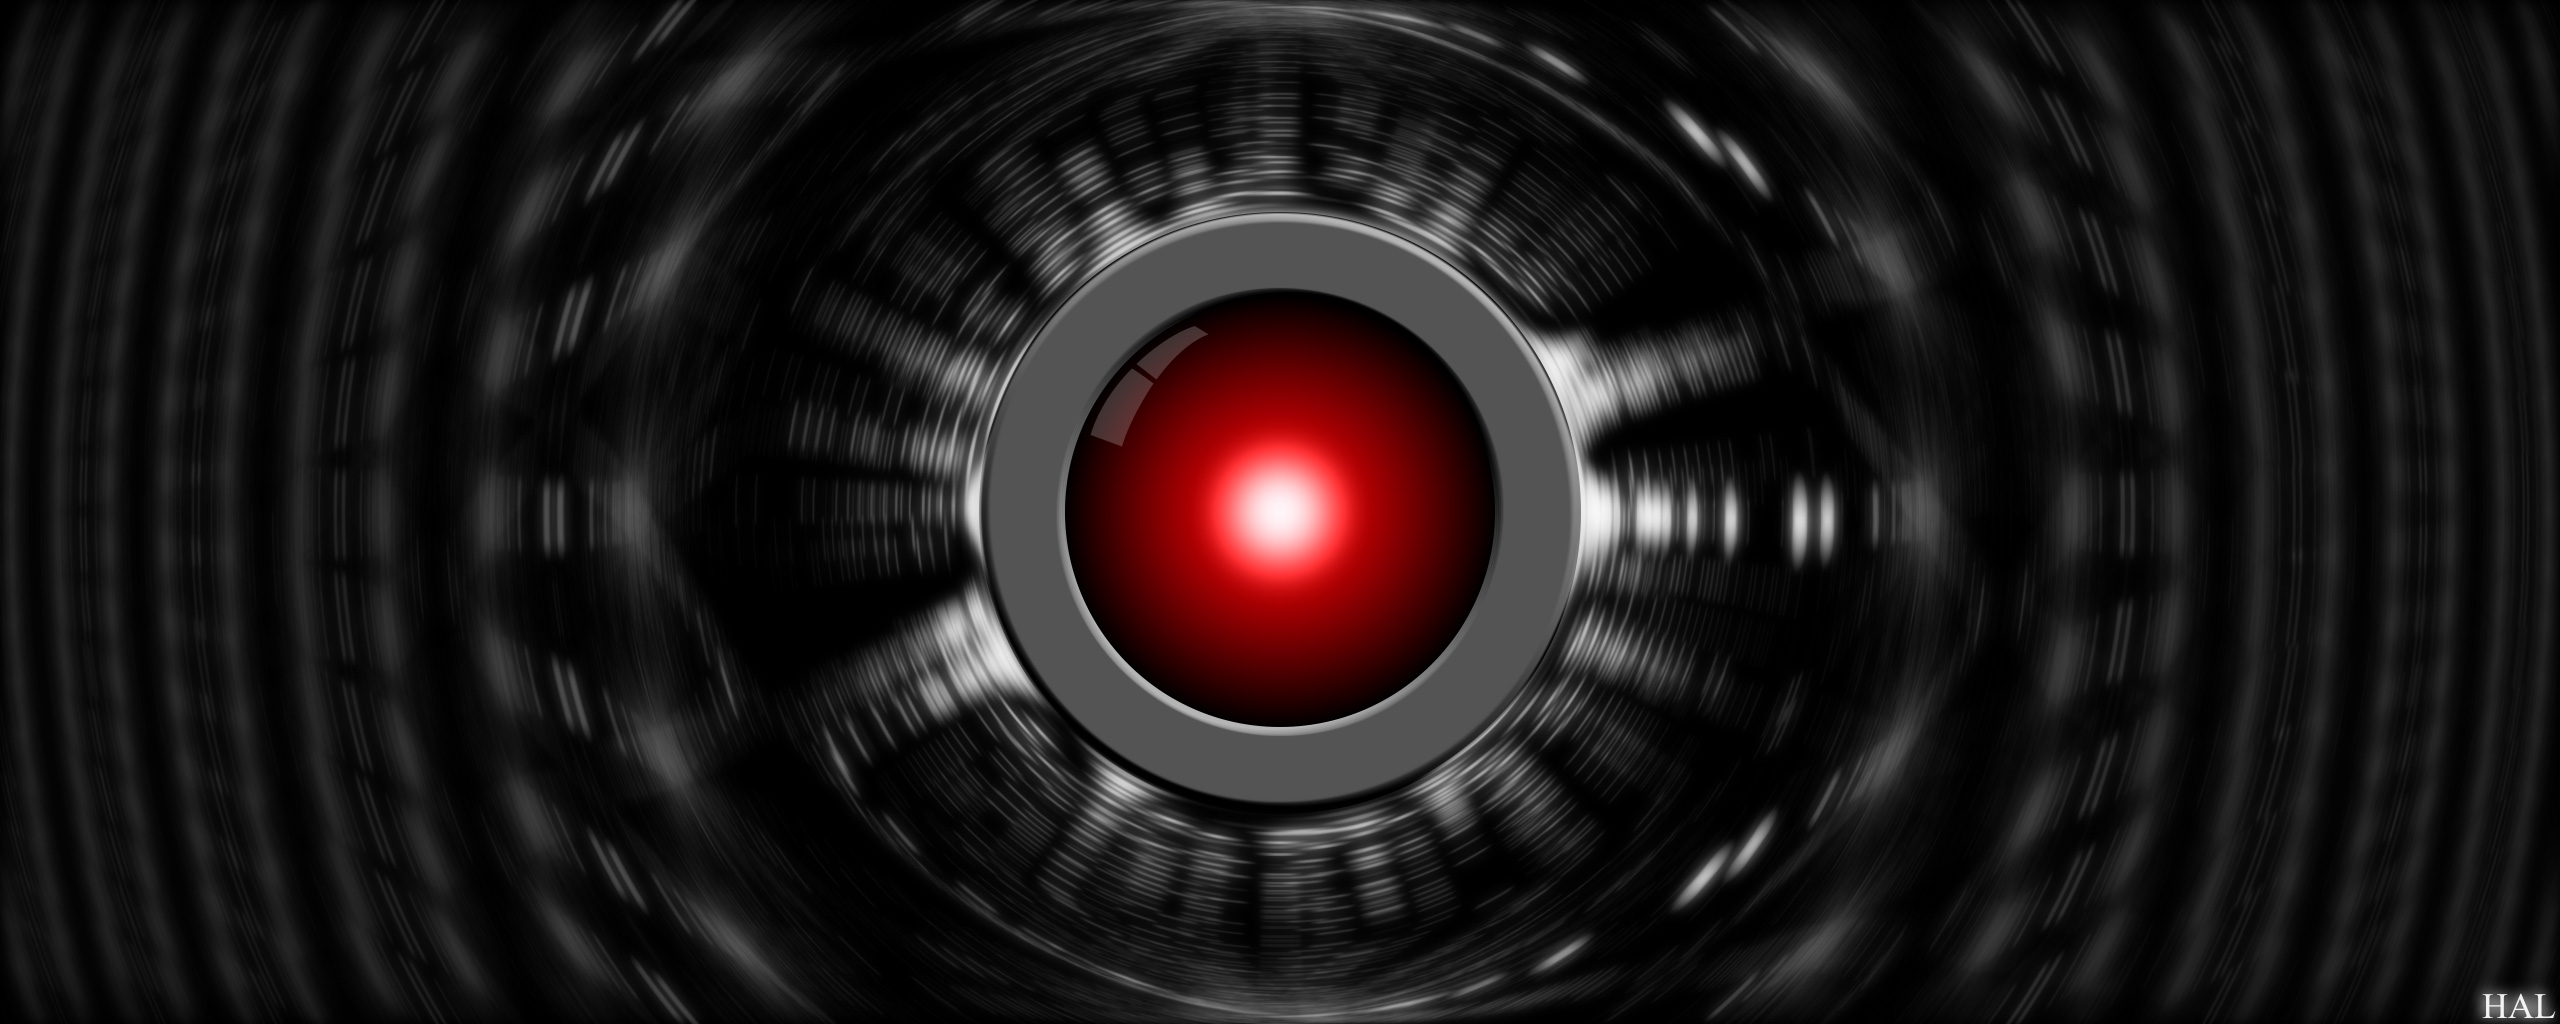 Movie 2001: A Space Odyssey HD Wallpaper | Background Image